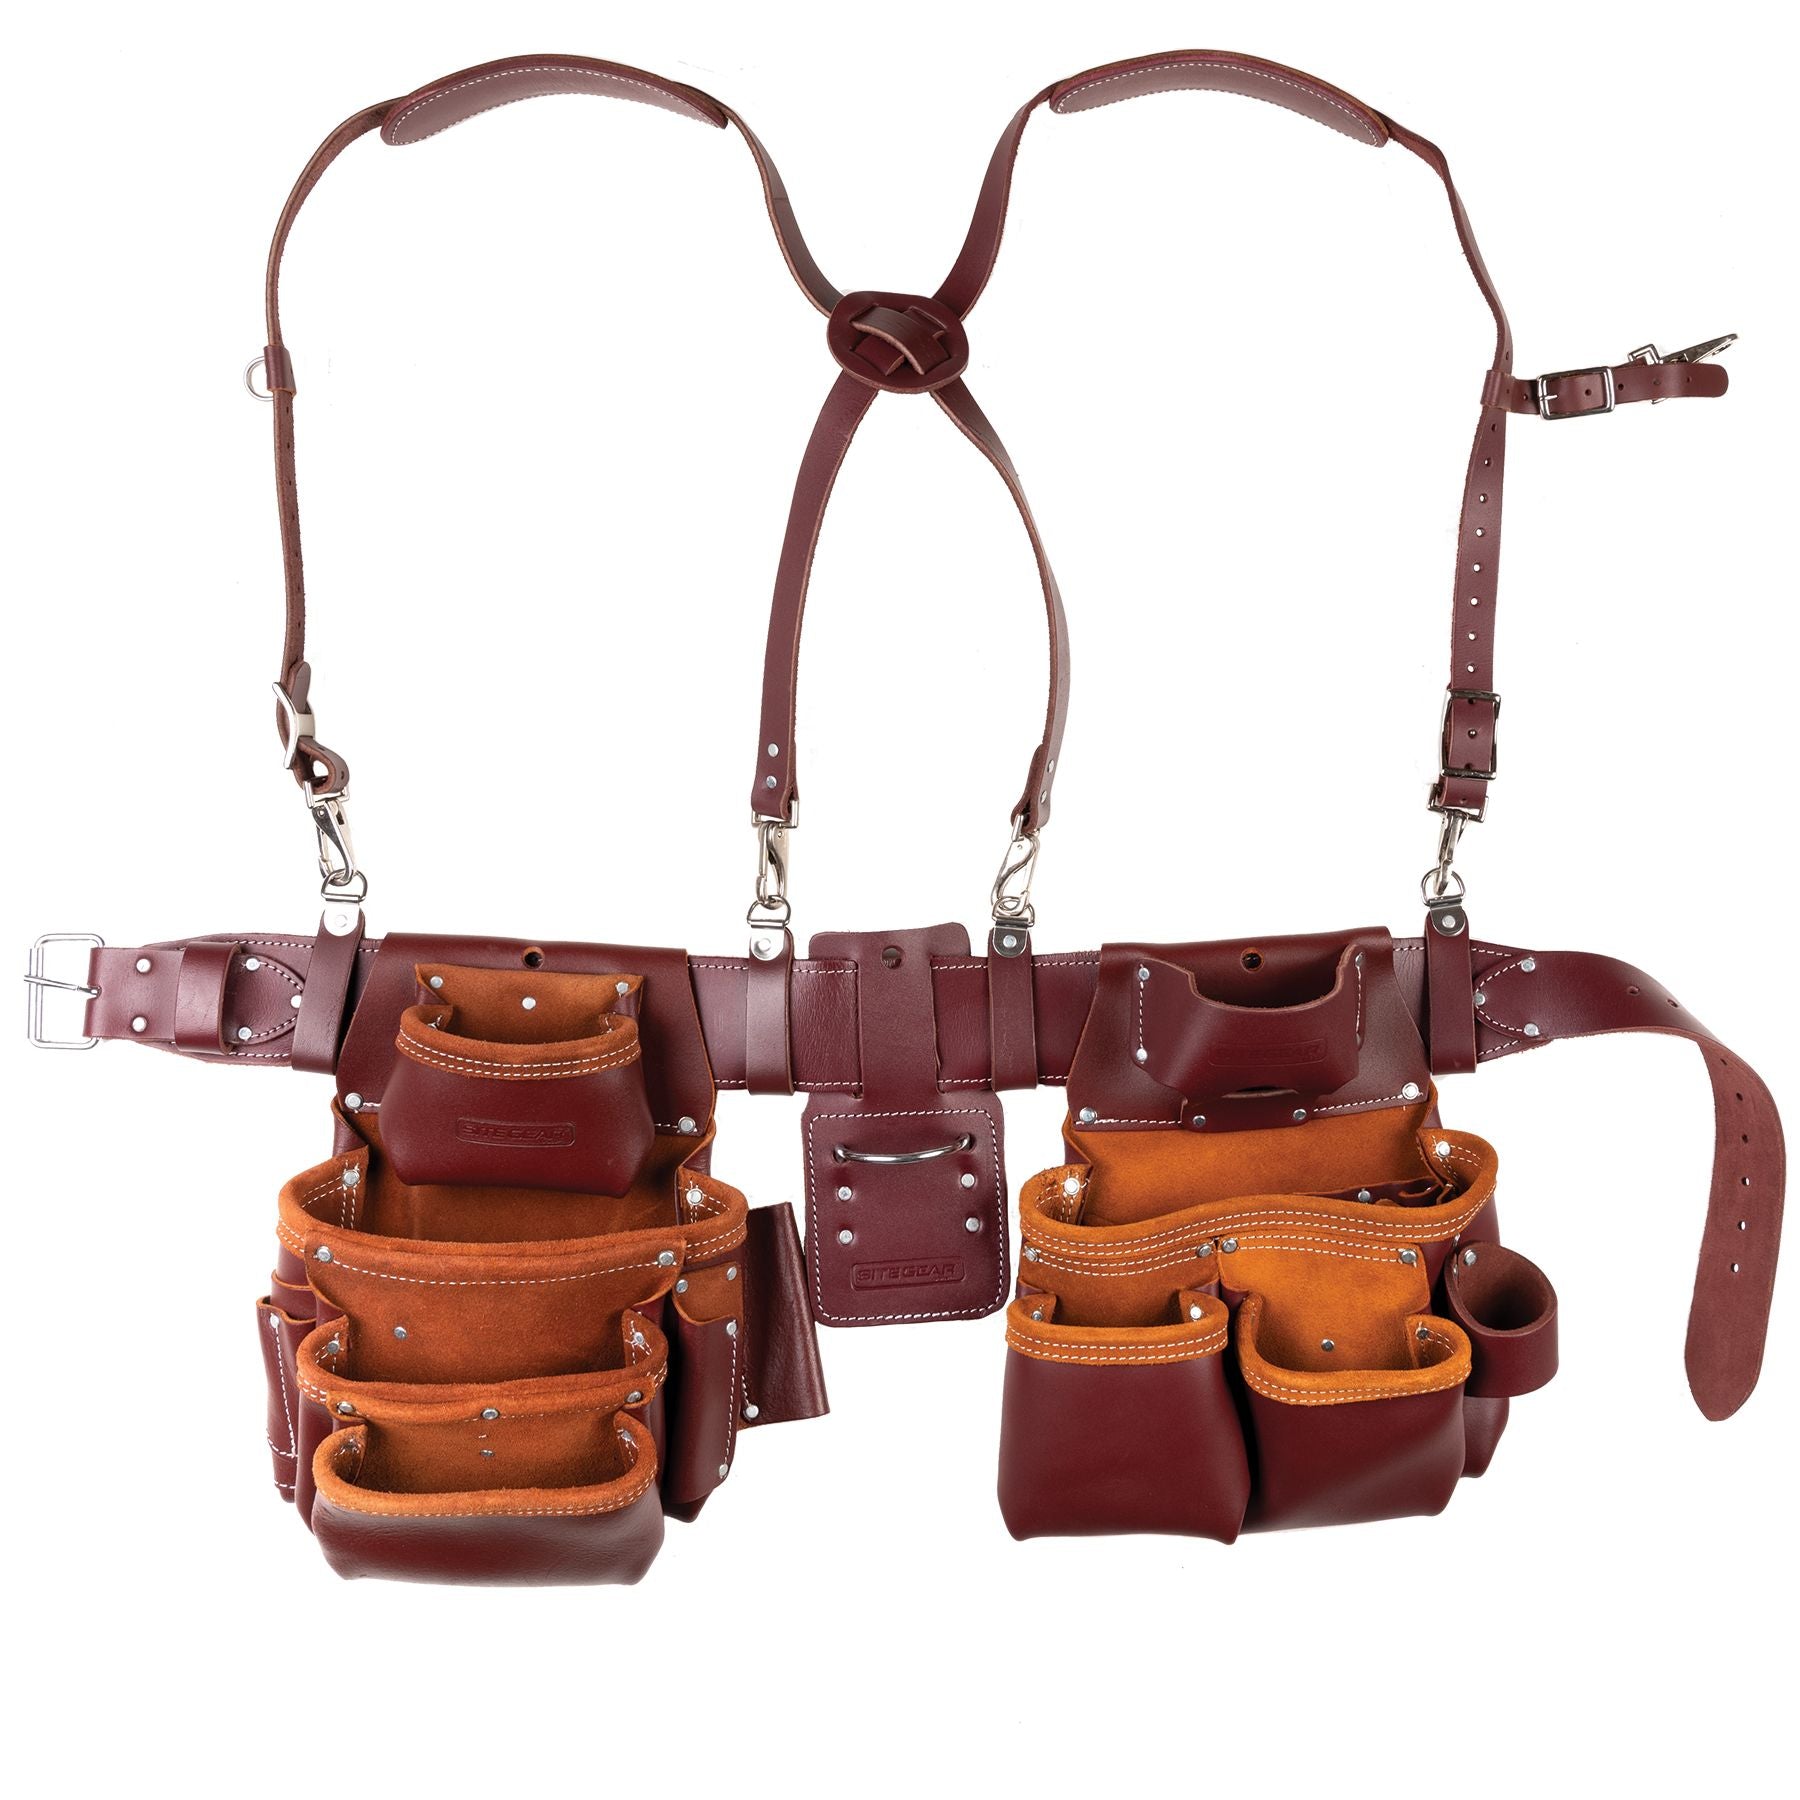 SitePro 51-15089S-XL 7 Pouch Framer Complete Set, with Suspenders